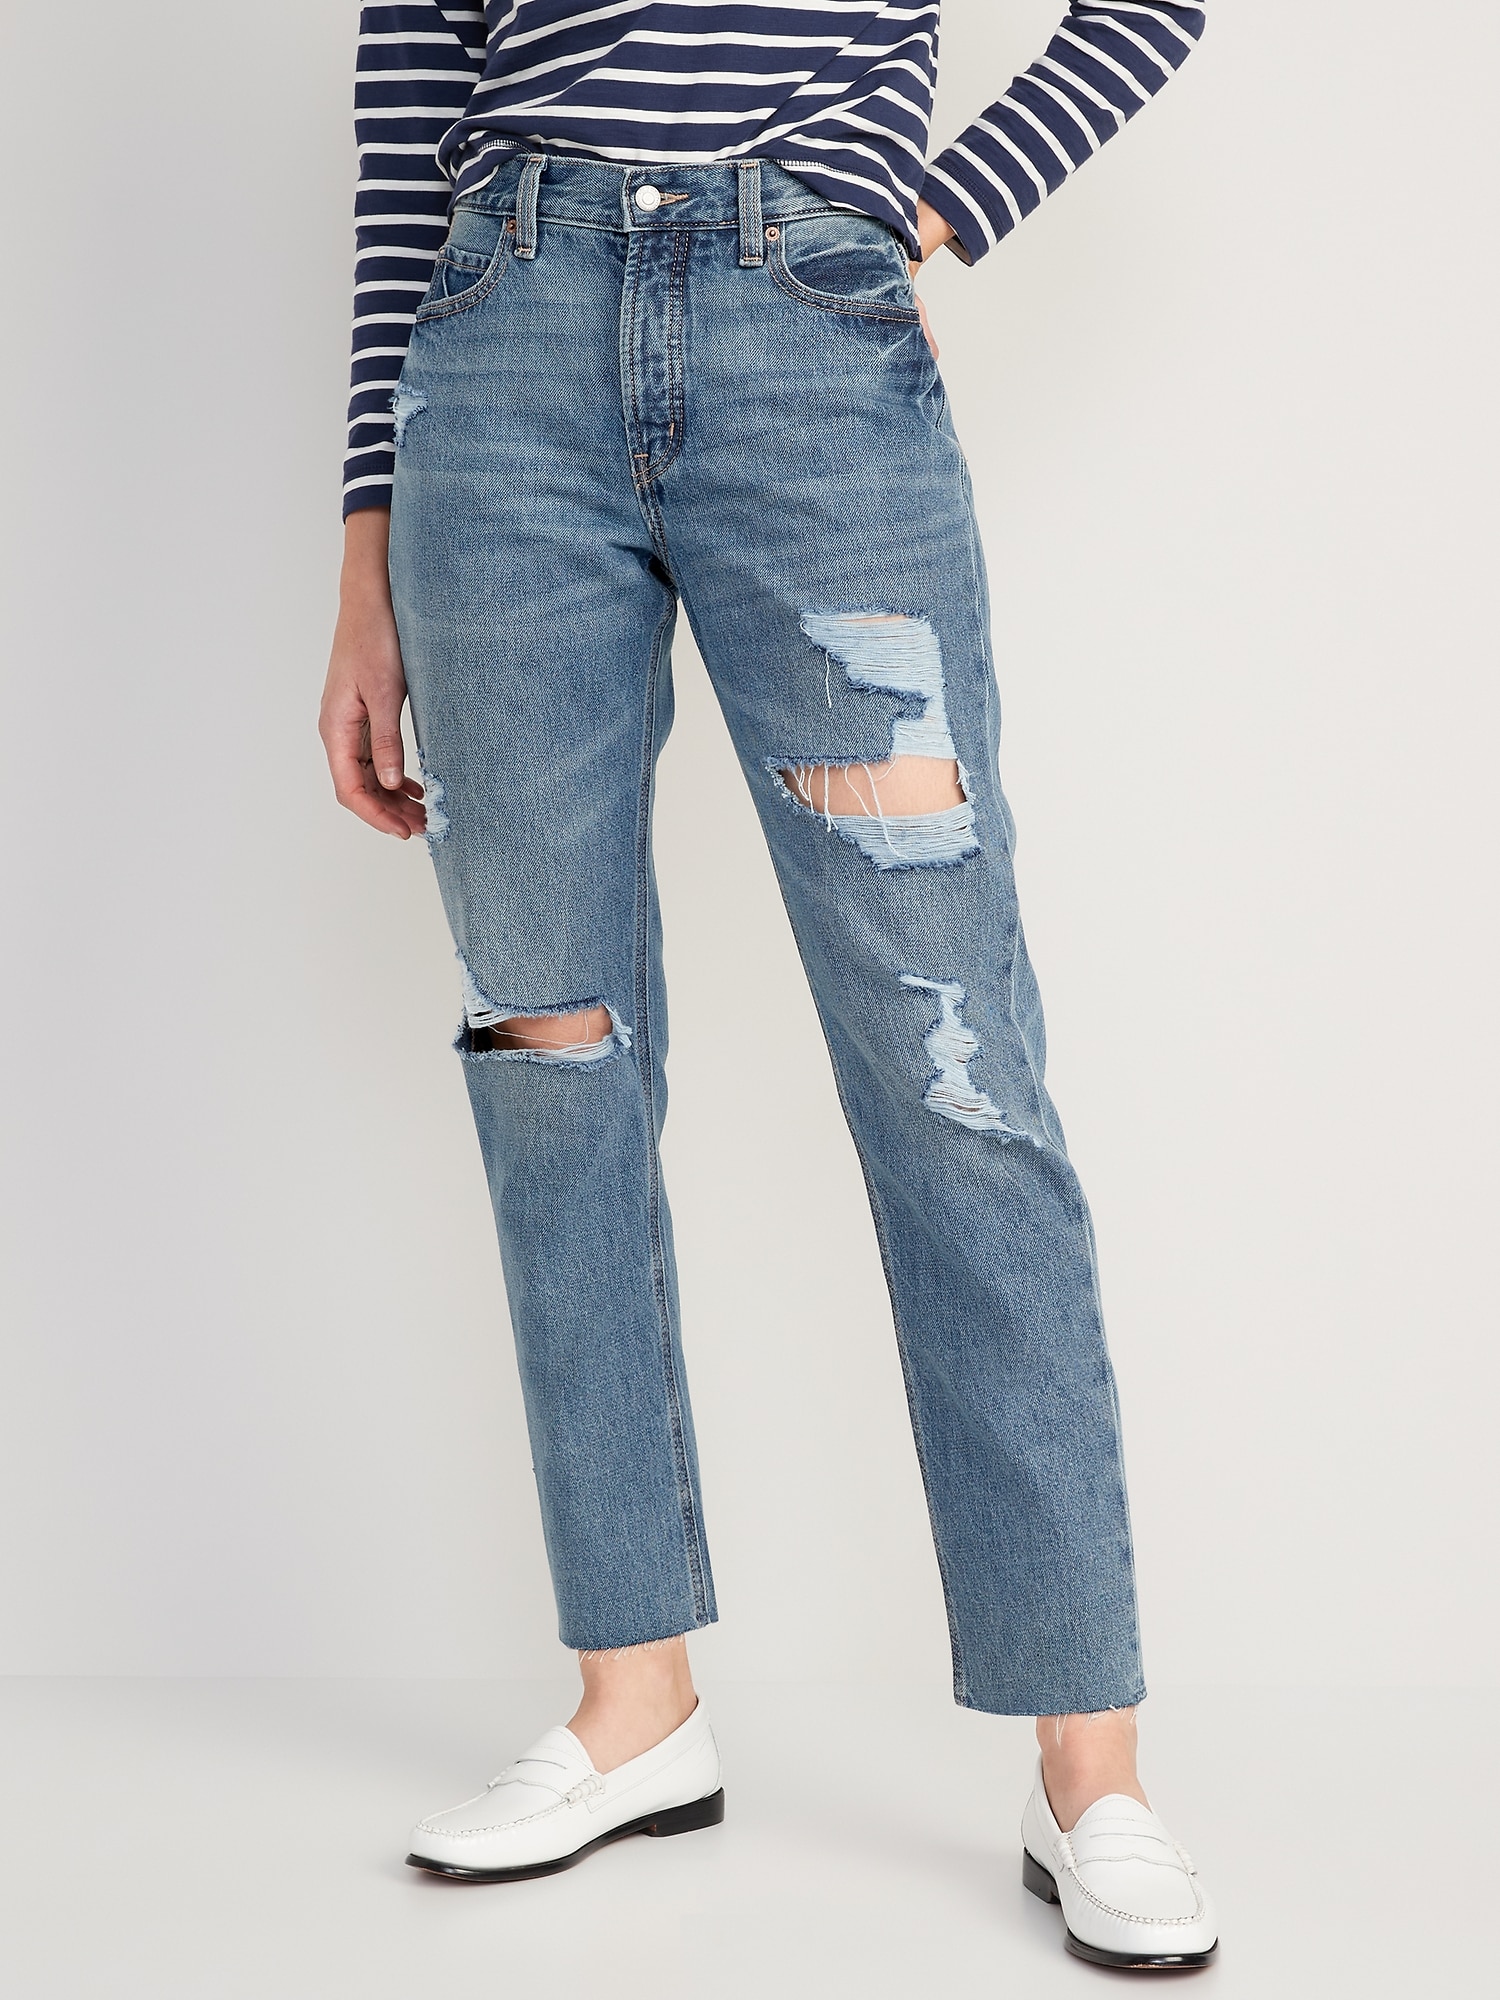 High-Waisted Slouchy Straight Cropped Ripped Jeans for Women